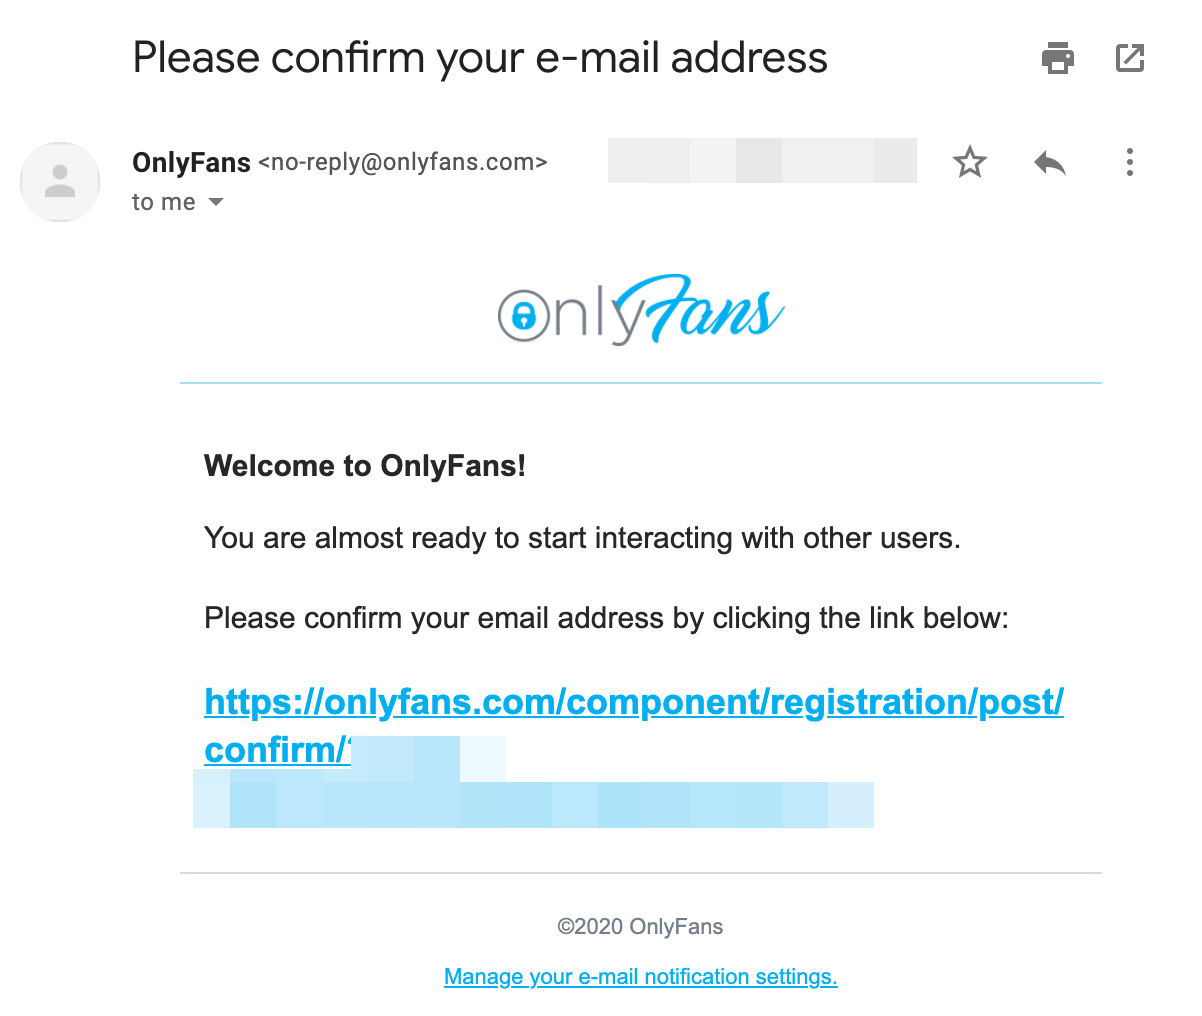 Best email to use for onlyfans